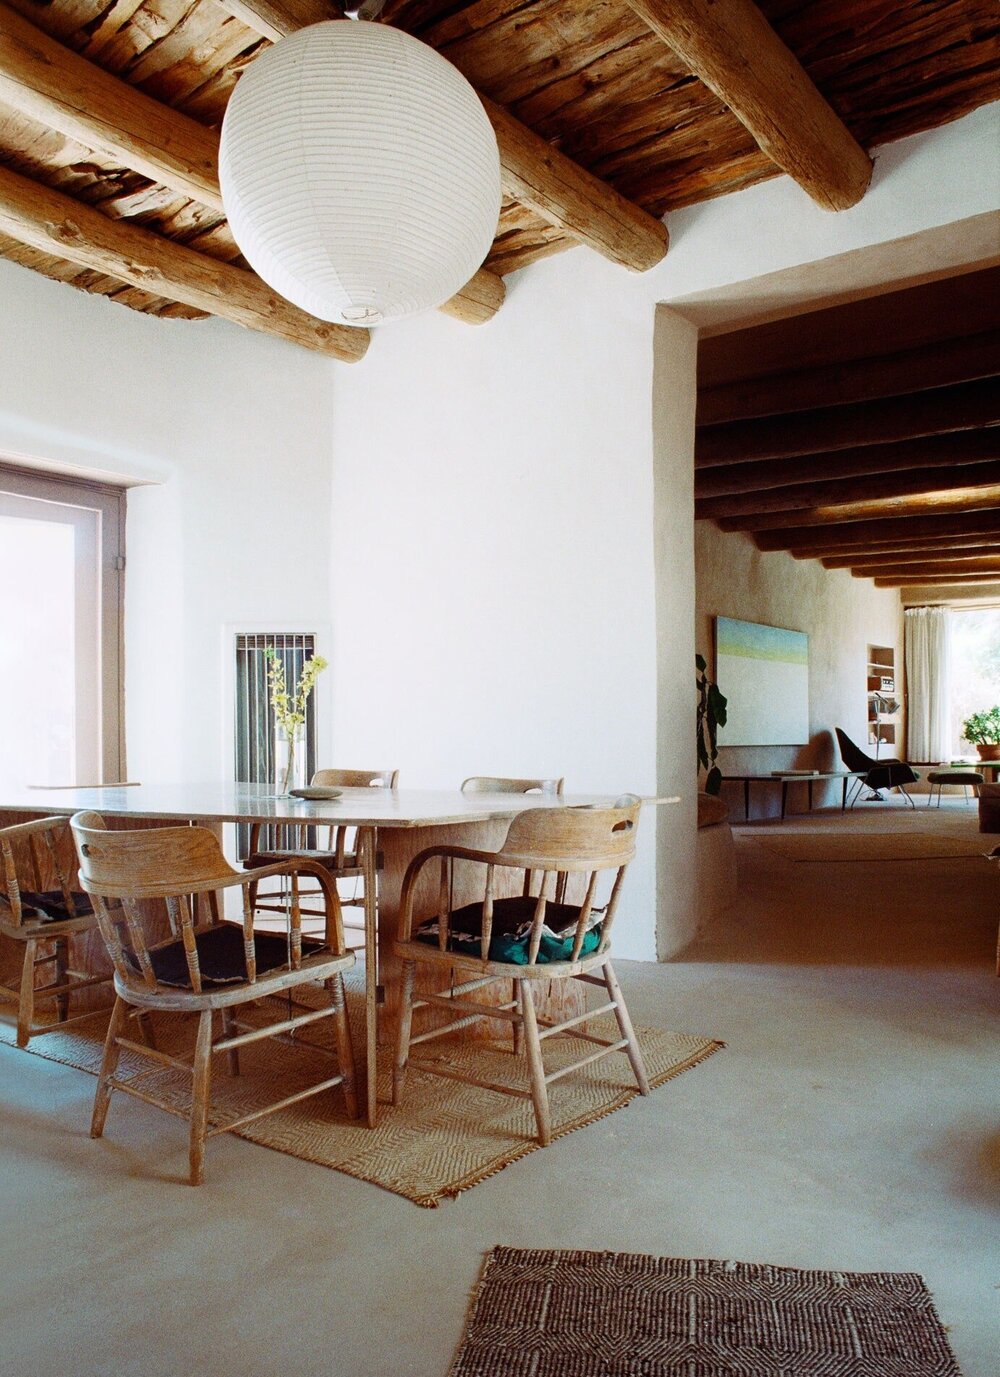  Akari lantern in Painter Georgia O’Keeffe’s New Mexico home. Source:  Architectural Digest  